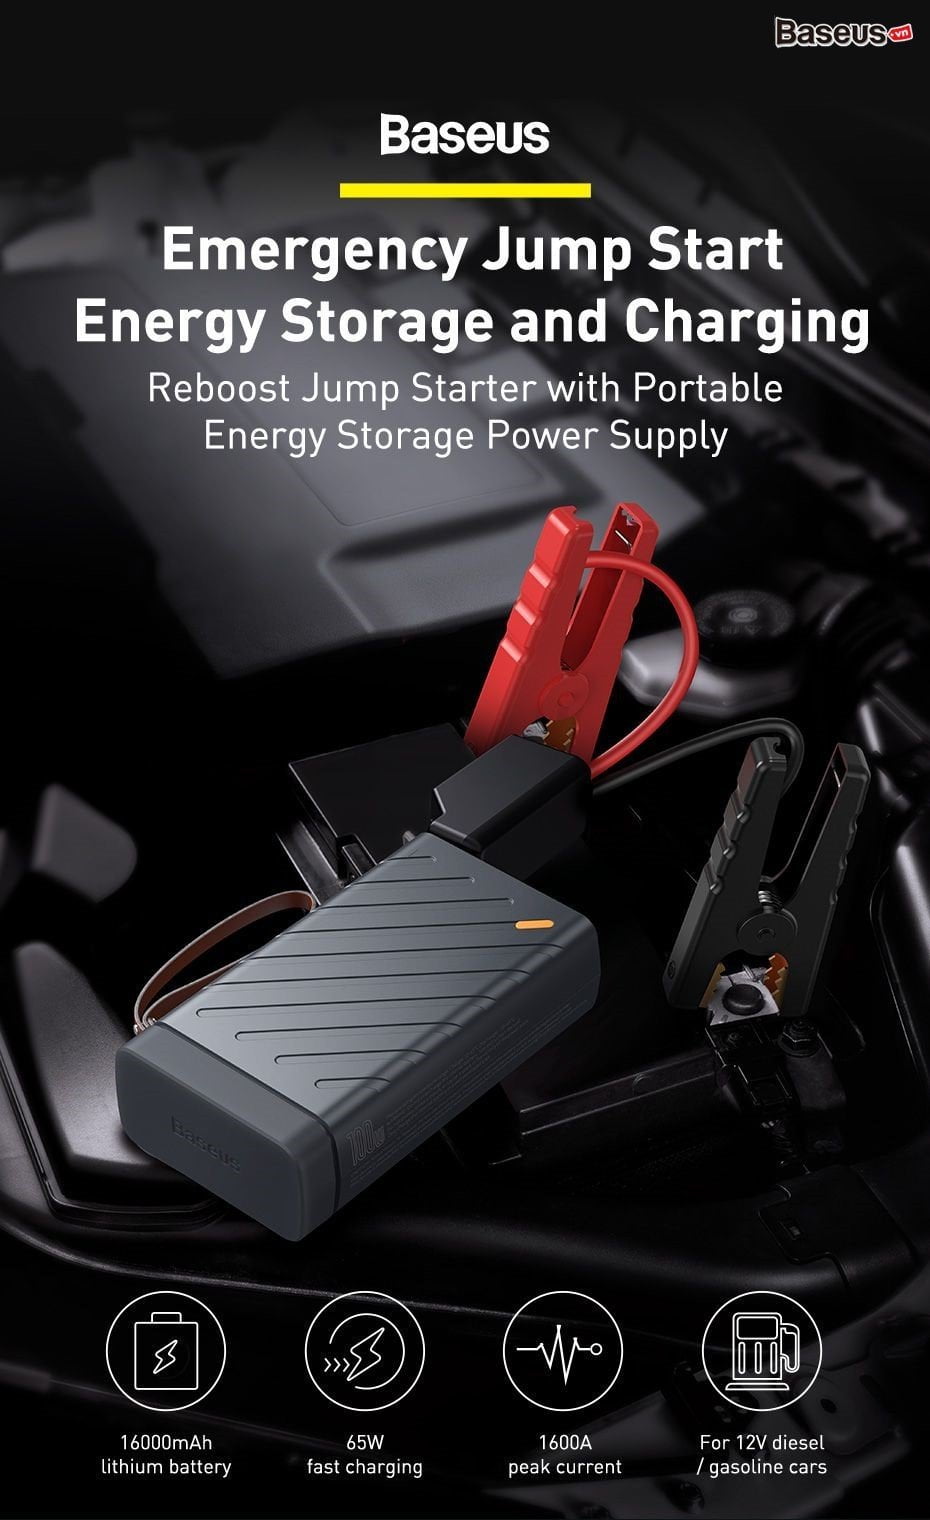 reboost jump starter with portable energy storage power supply 01 ee0814394df04f83a50d5190f5d507de